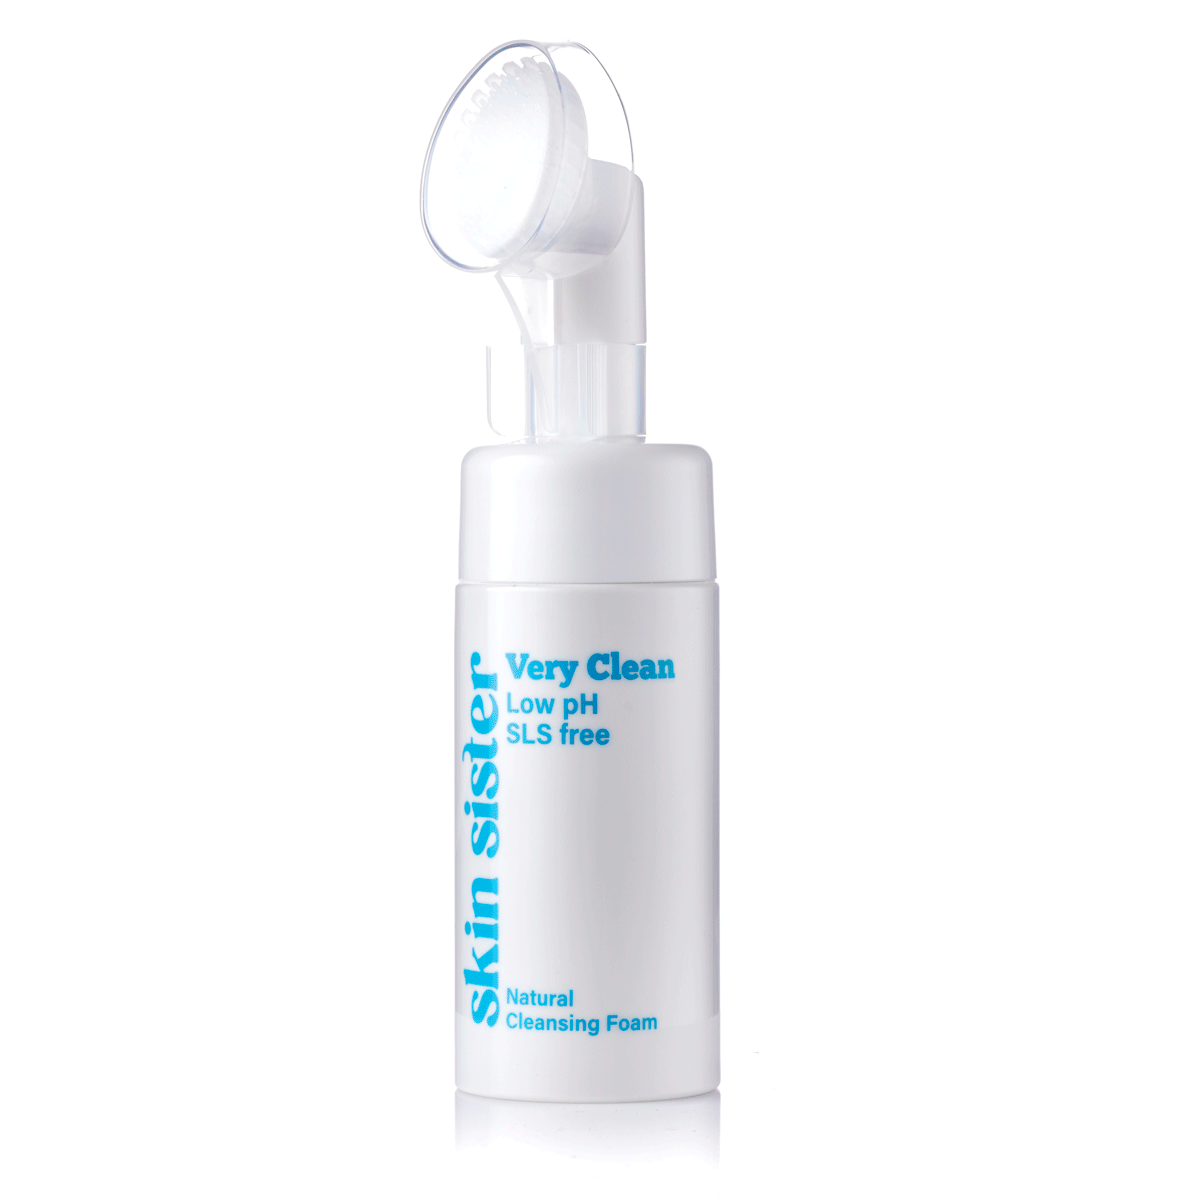 Hybrid Cleanser, gentle cleanser ingredients matched with a silicone application brush to deep clean pores. 360 spinning image. 